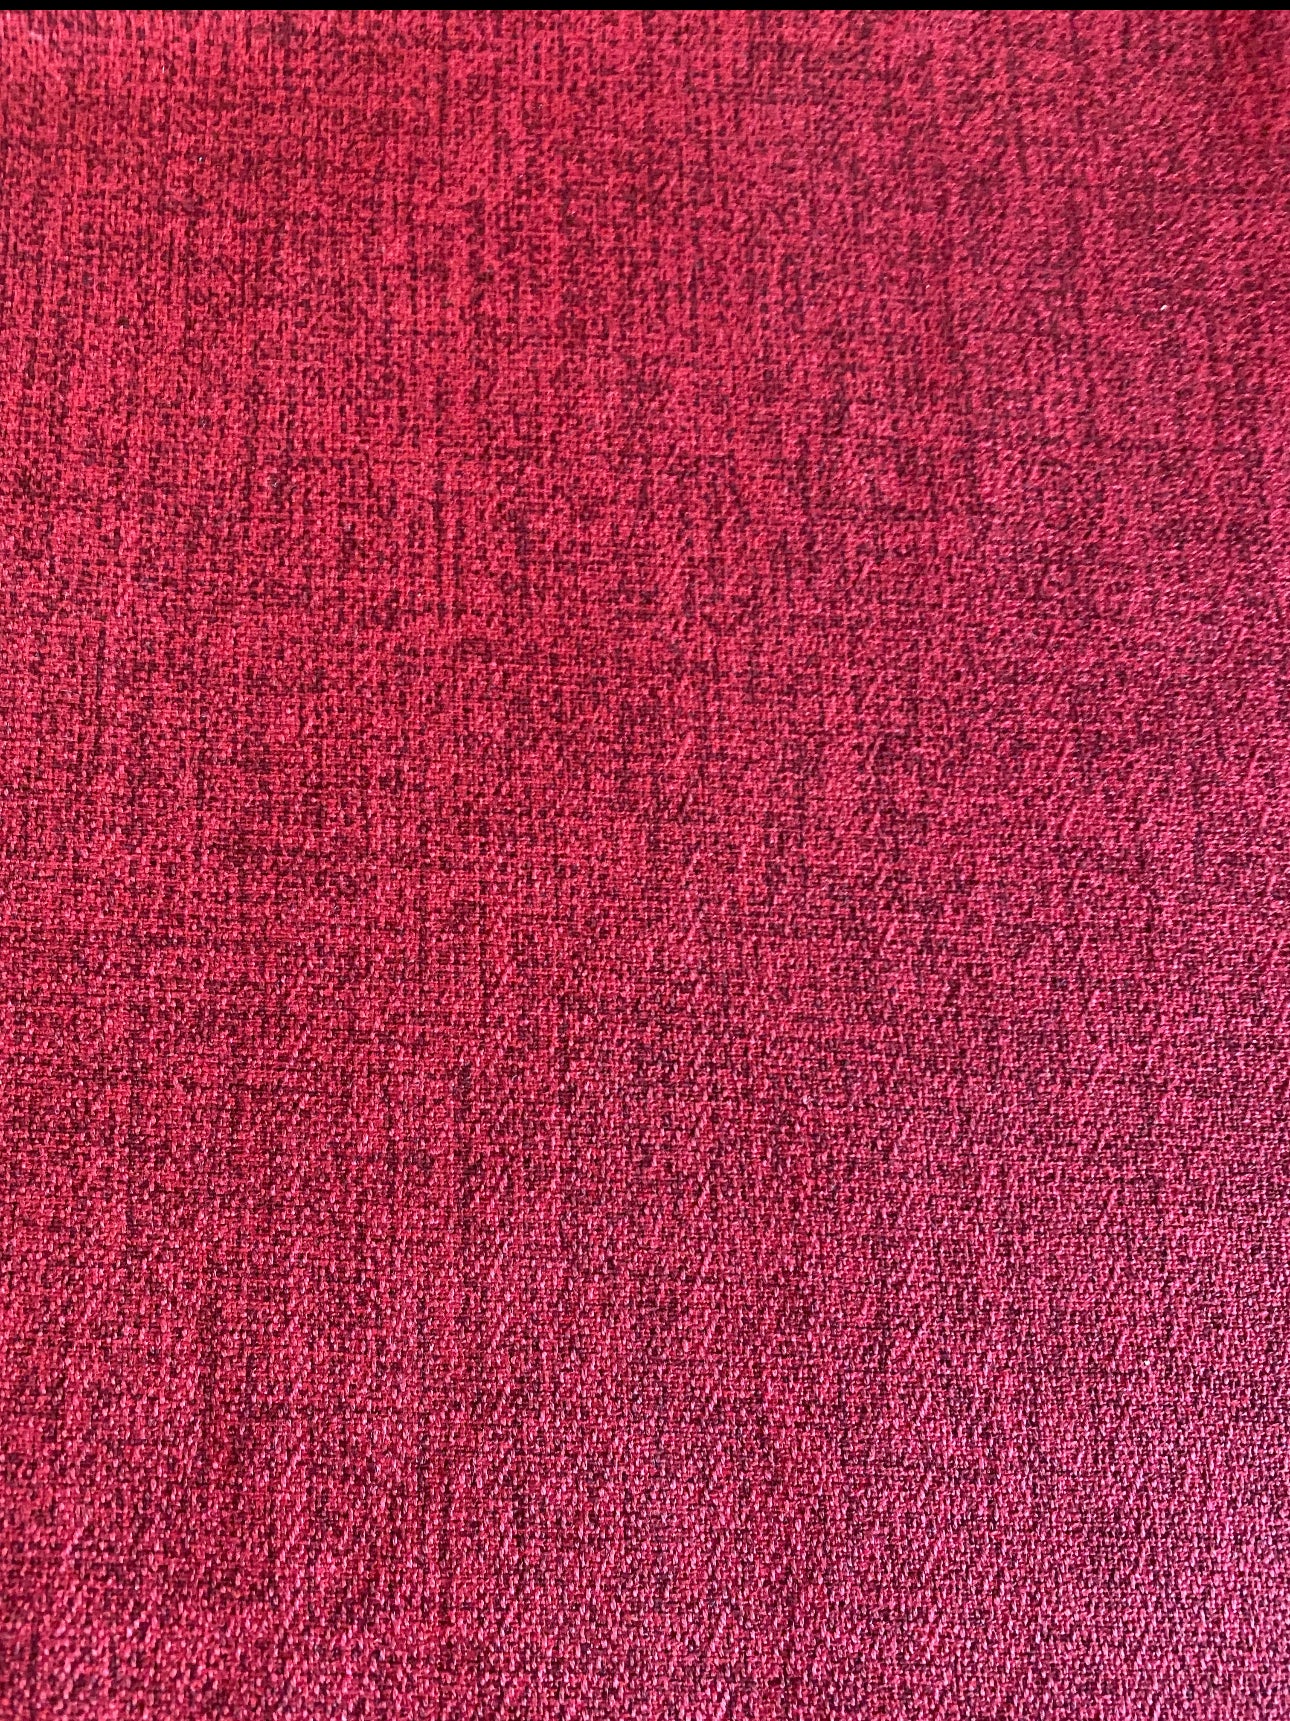 Red Solid Barkcloth 12” x 12" Swatch Samples